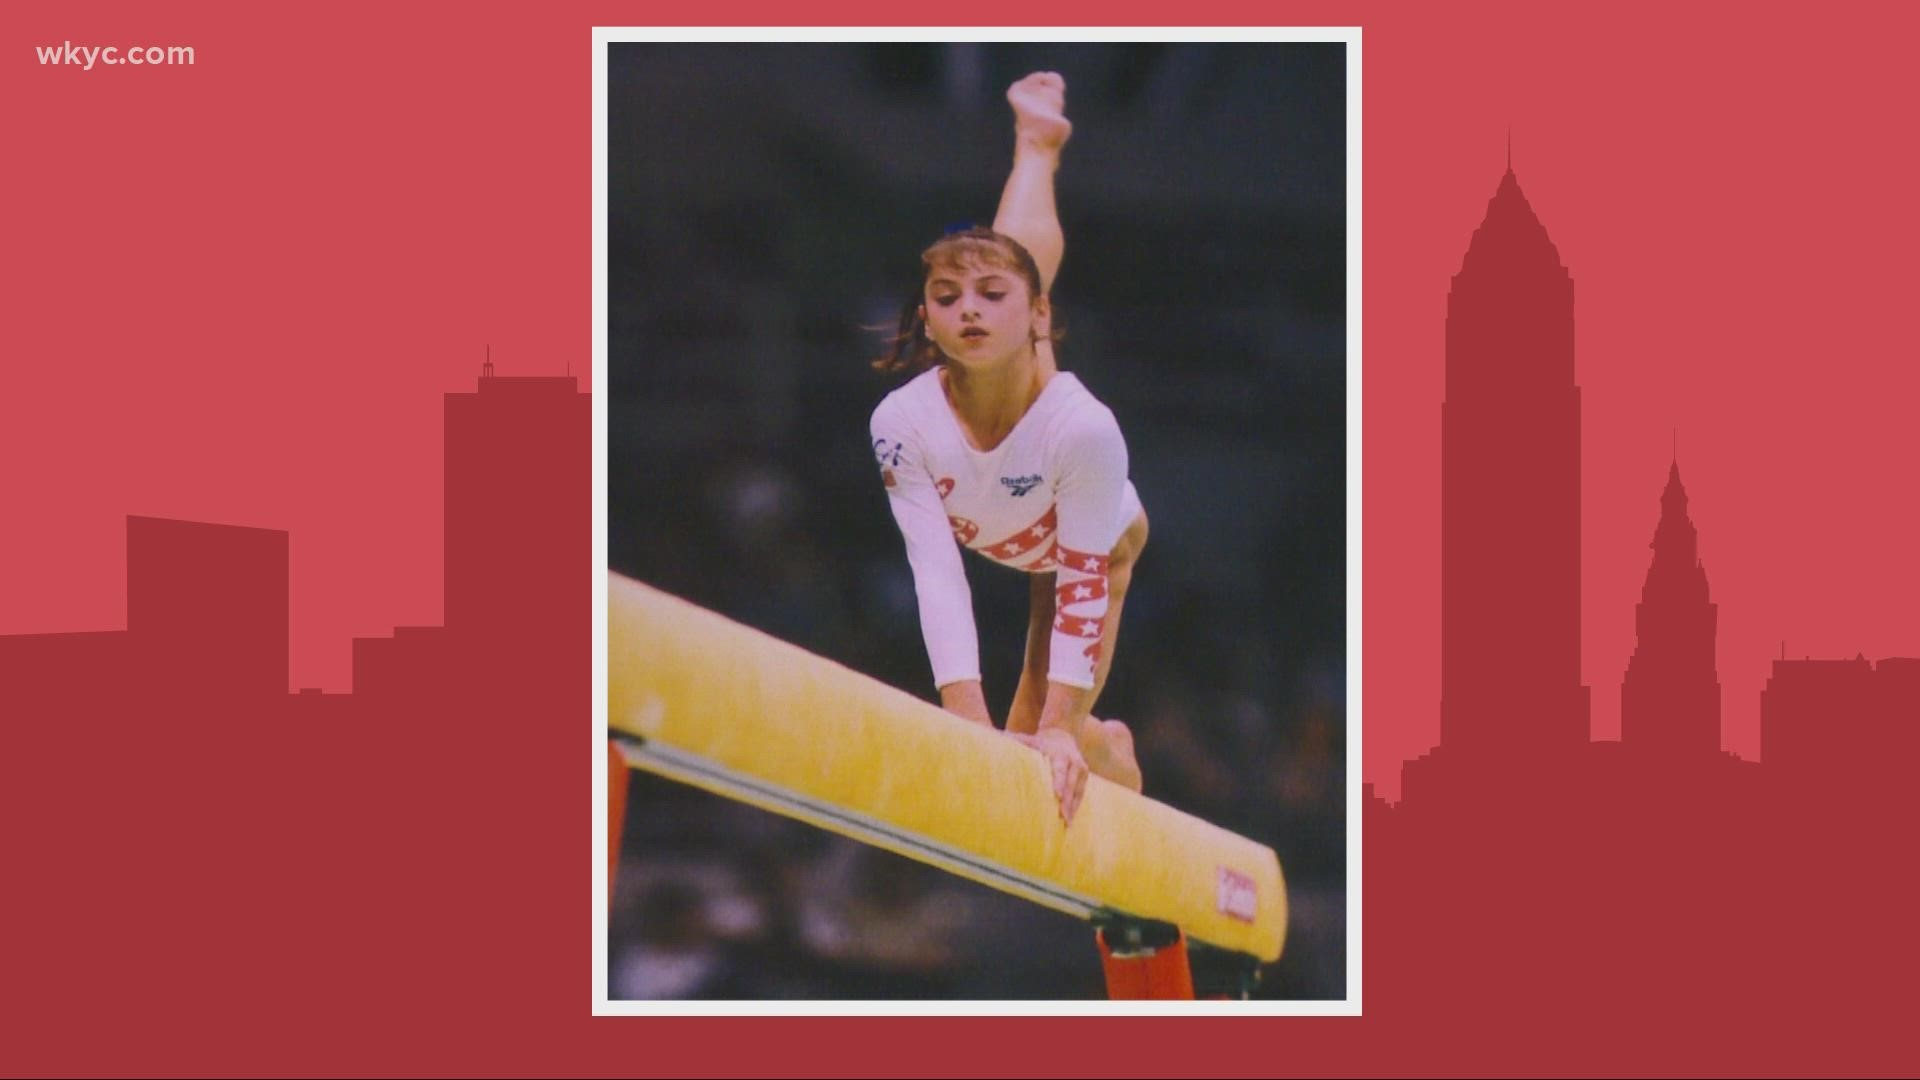 Moceanu earned gold at just 14 as part of the 1996 team. Today, her mission is to empower a new generation of gymnasts and help bring positive change to the sport.